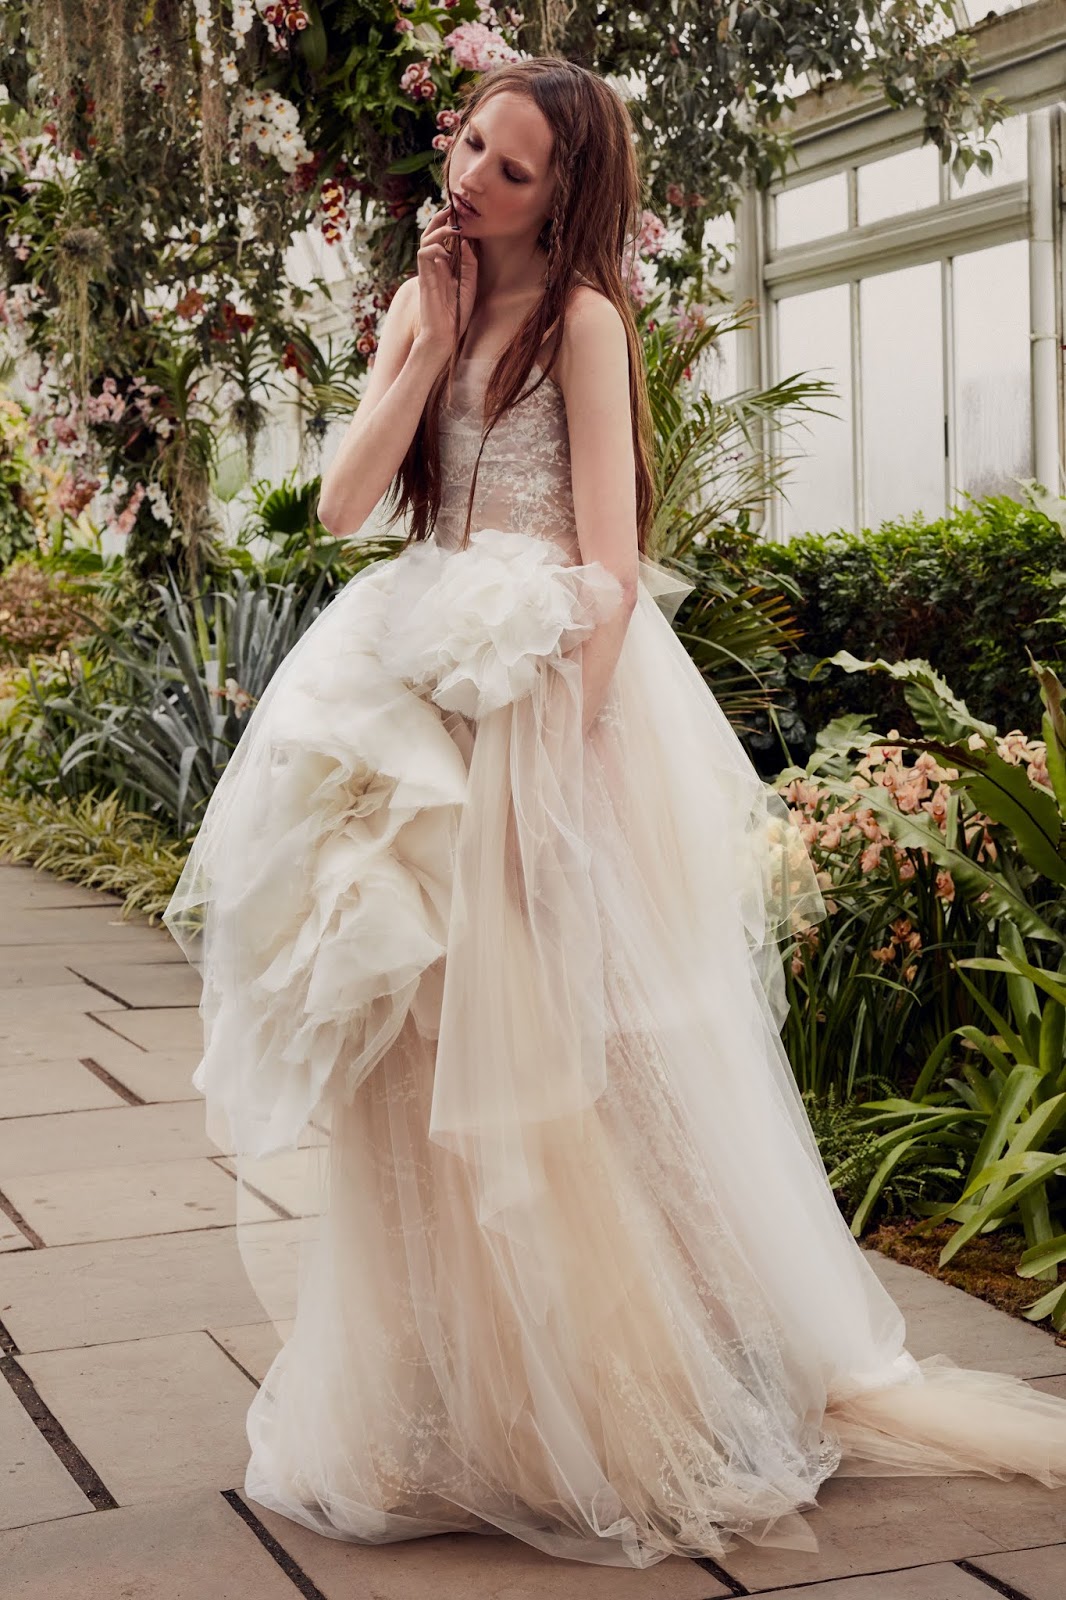 WEDDING GOWN GLAMOUR: VERA WANG